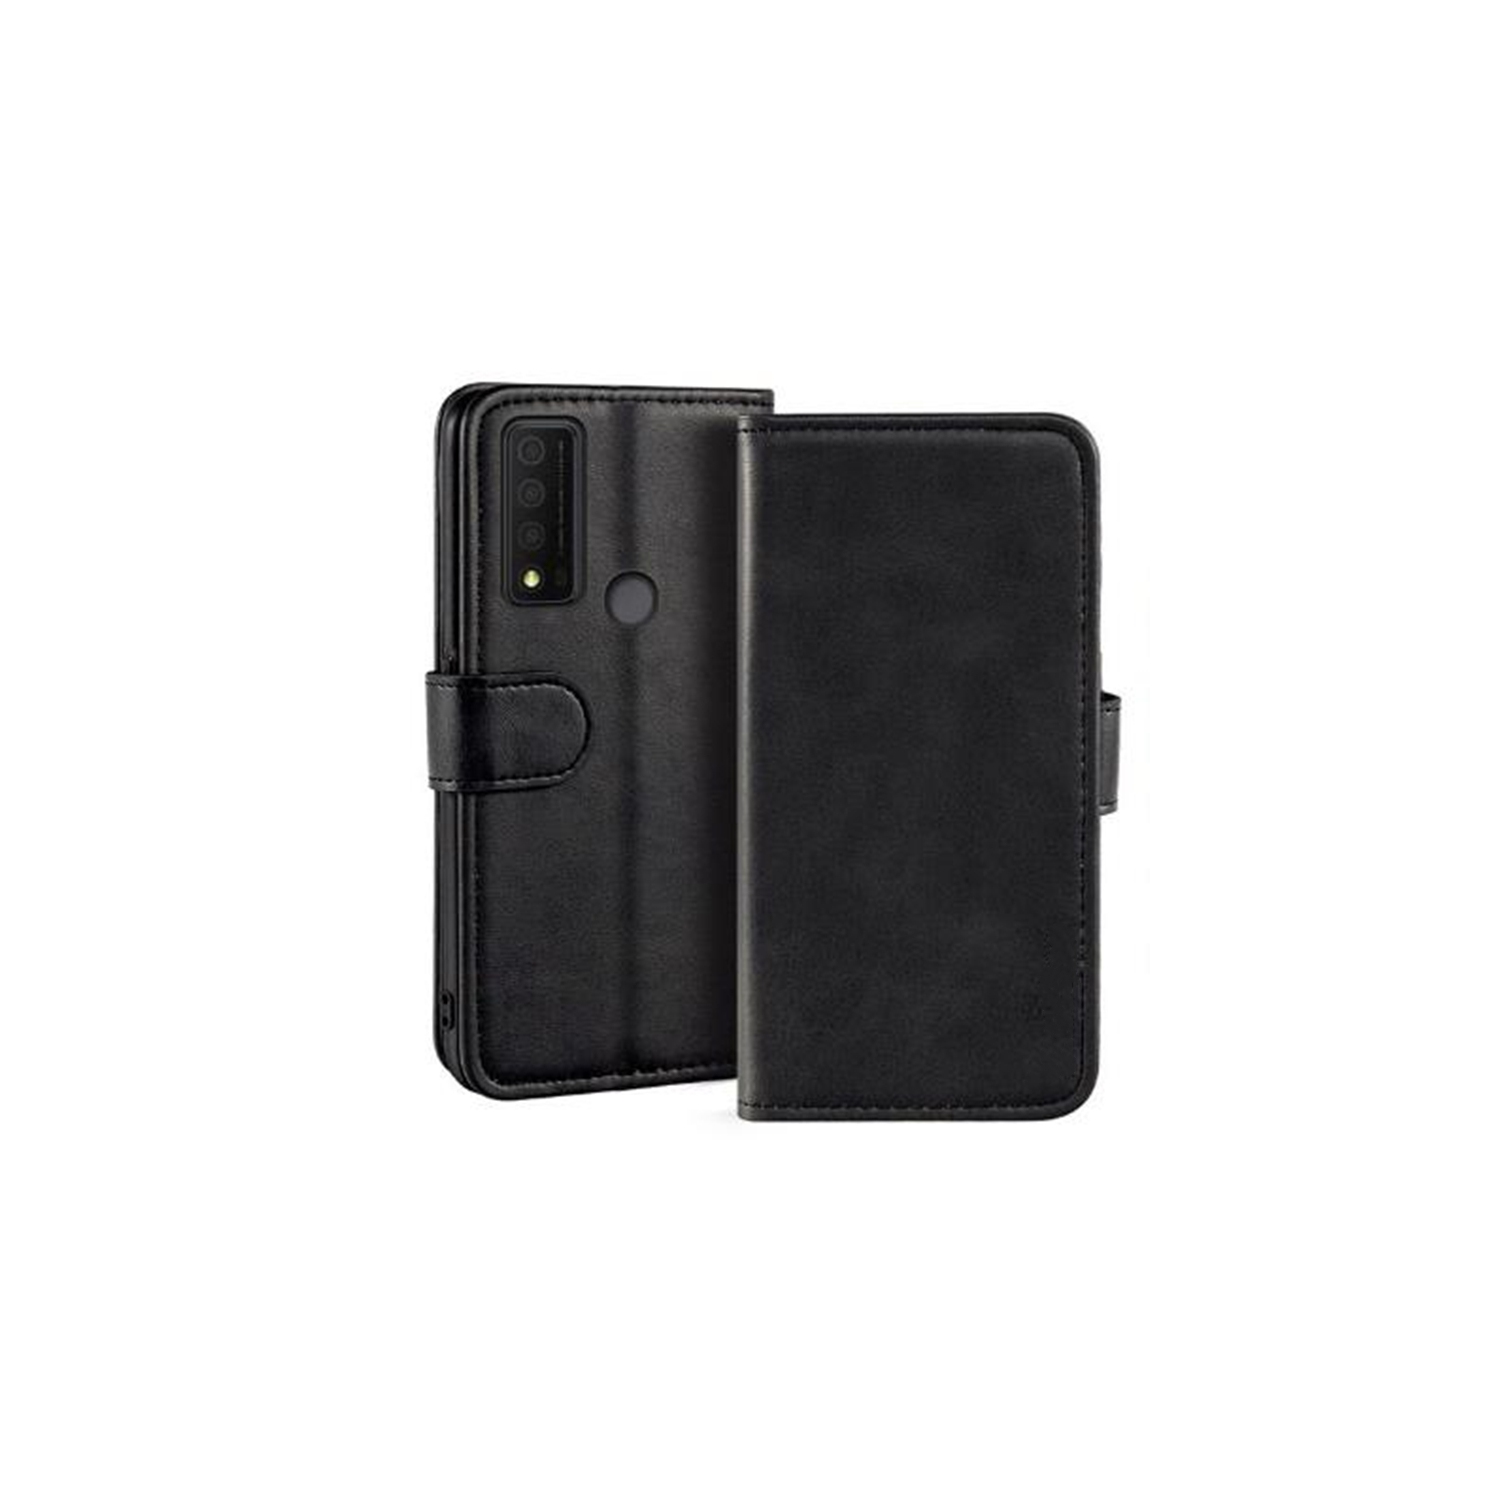 【CSmart】 Magnetic Card Slot Leather Folio Wallet Flip Case Cover for TCL 30 XE 5G, Black